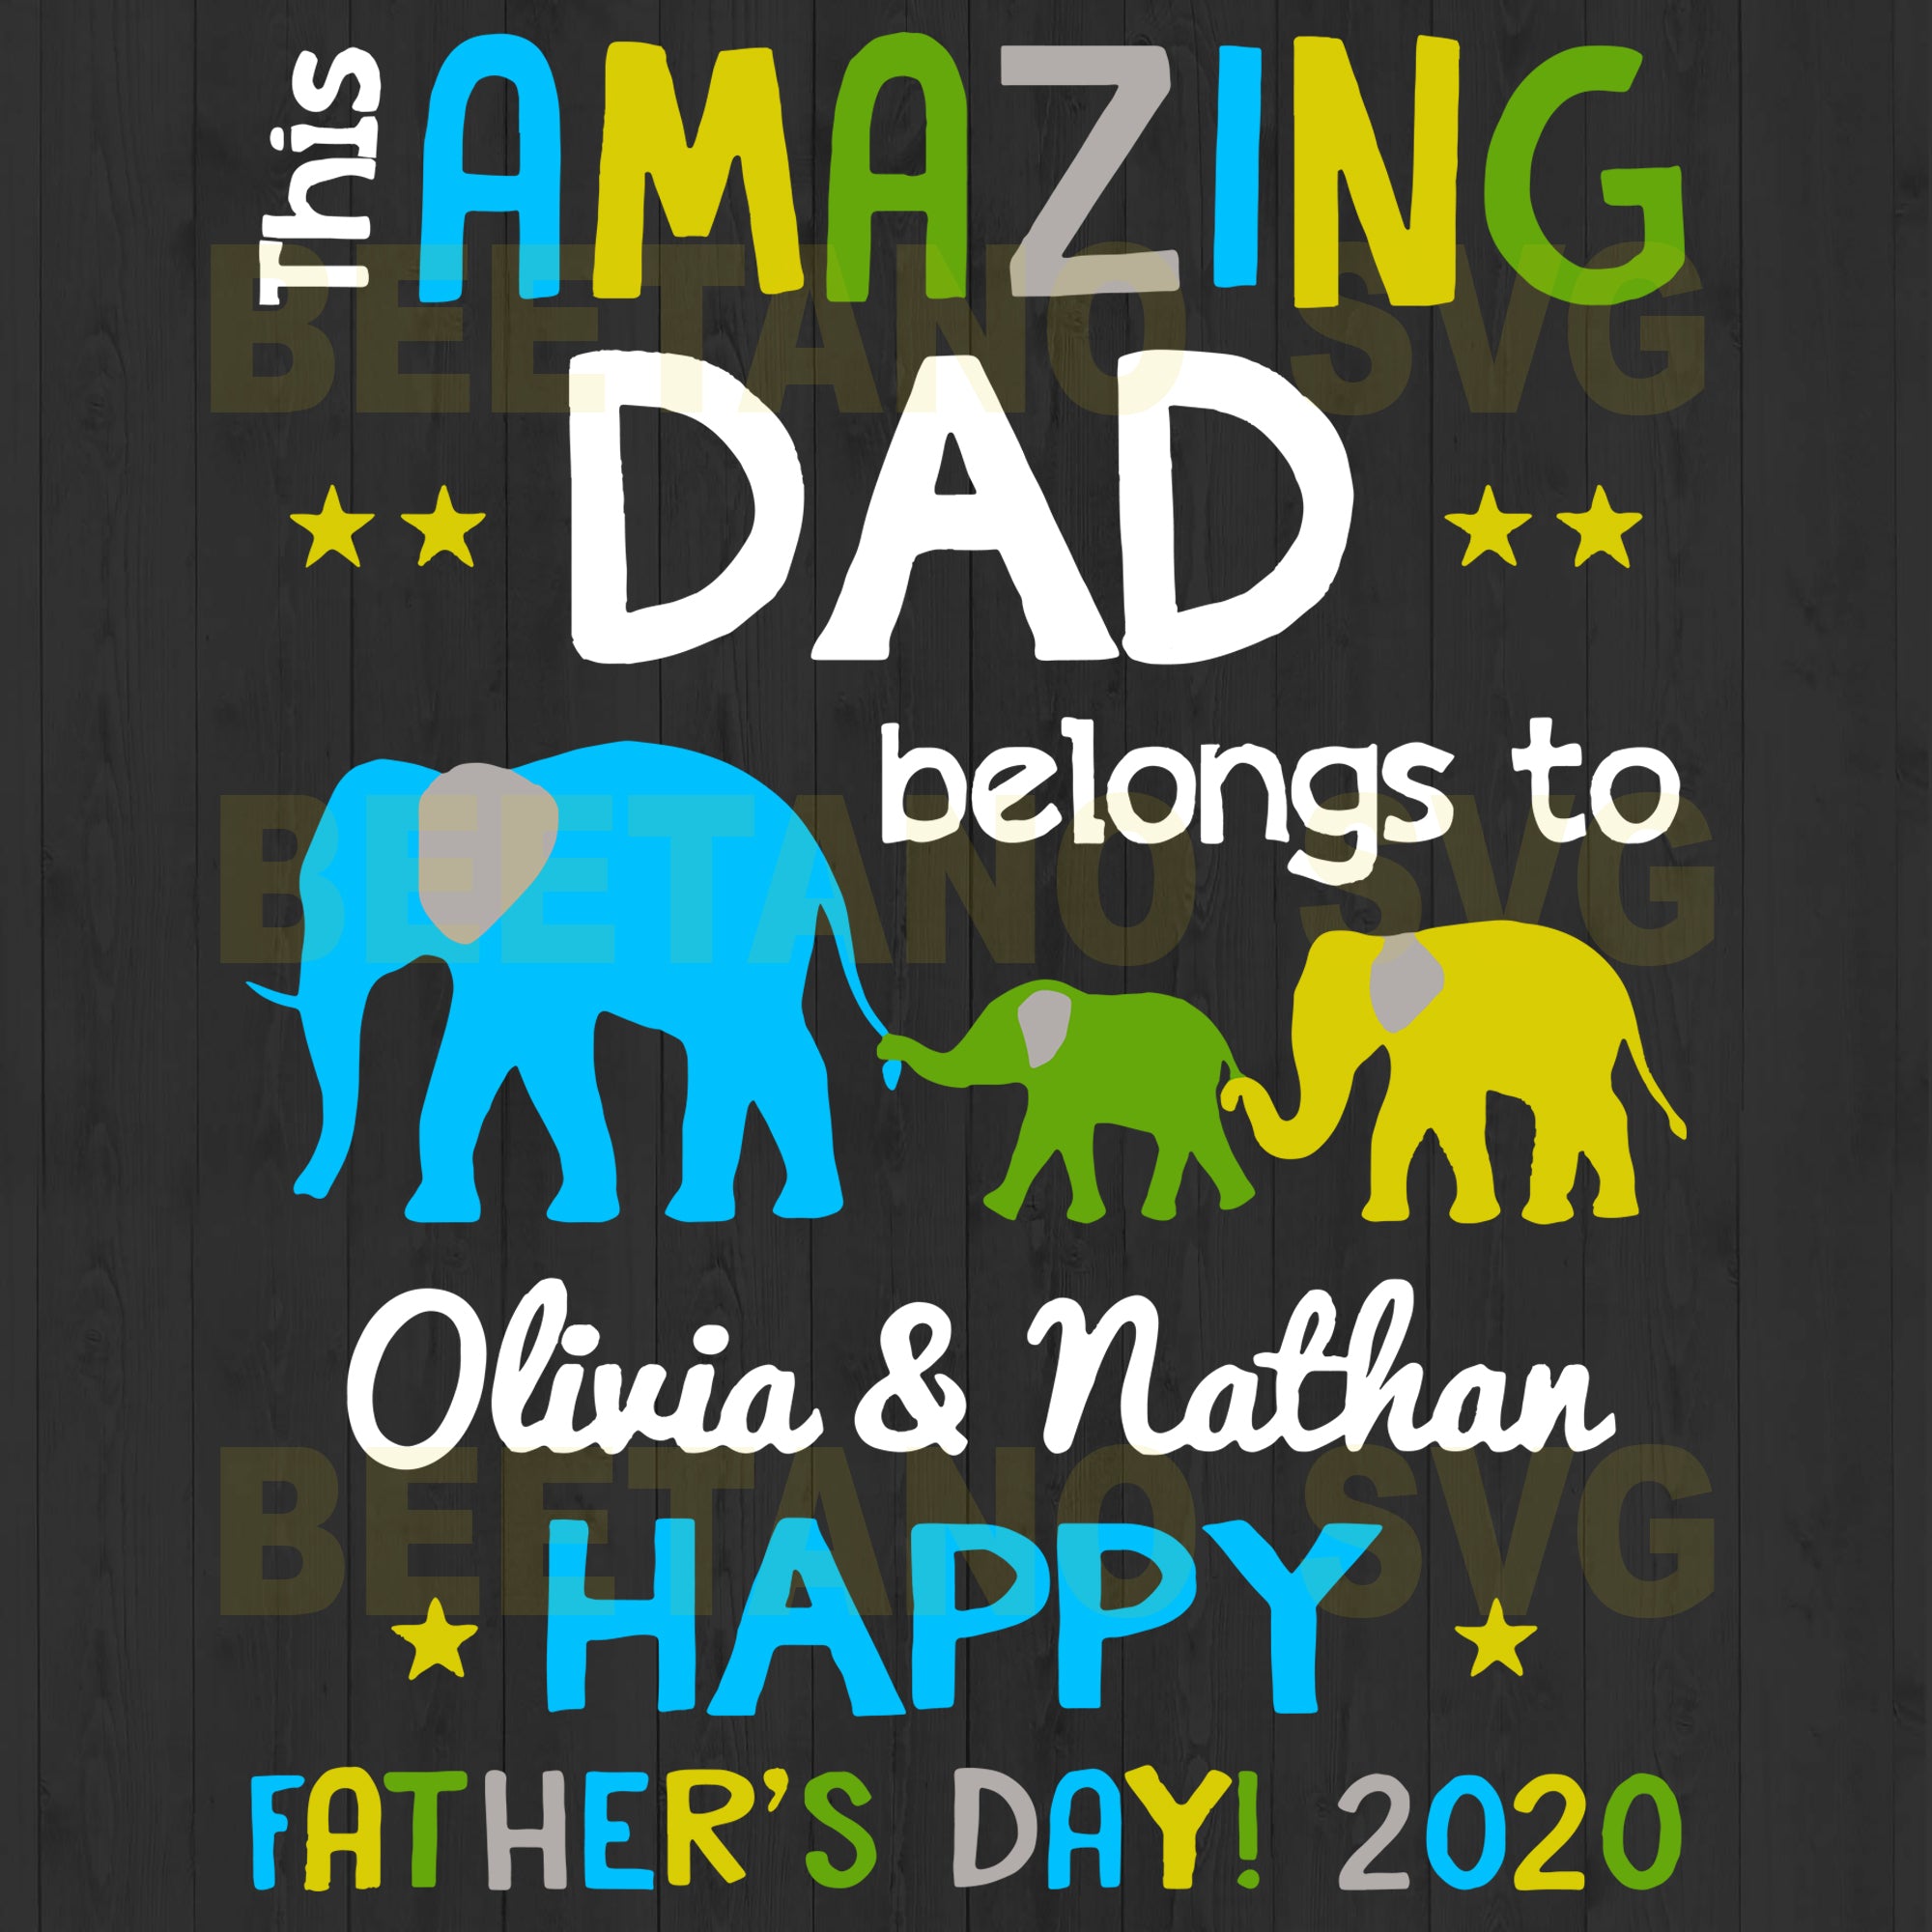 Download This Amazing Dad Belongs To Happy Father's Day Svg Files For Instant D - BeetanoSVG Scalable ...